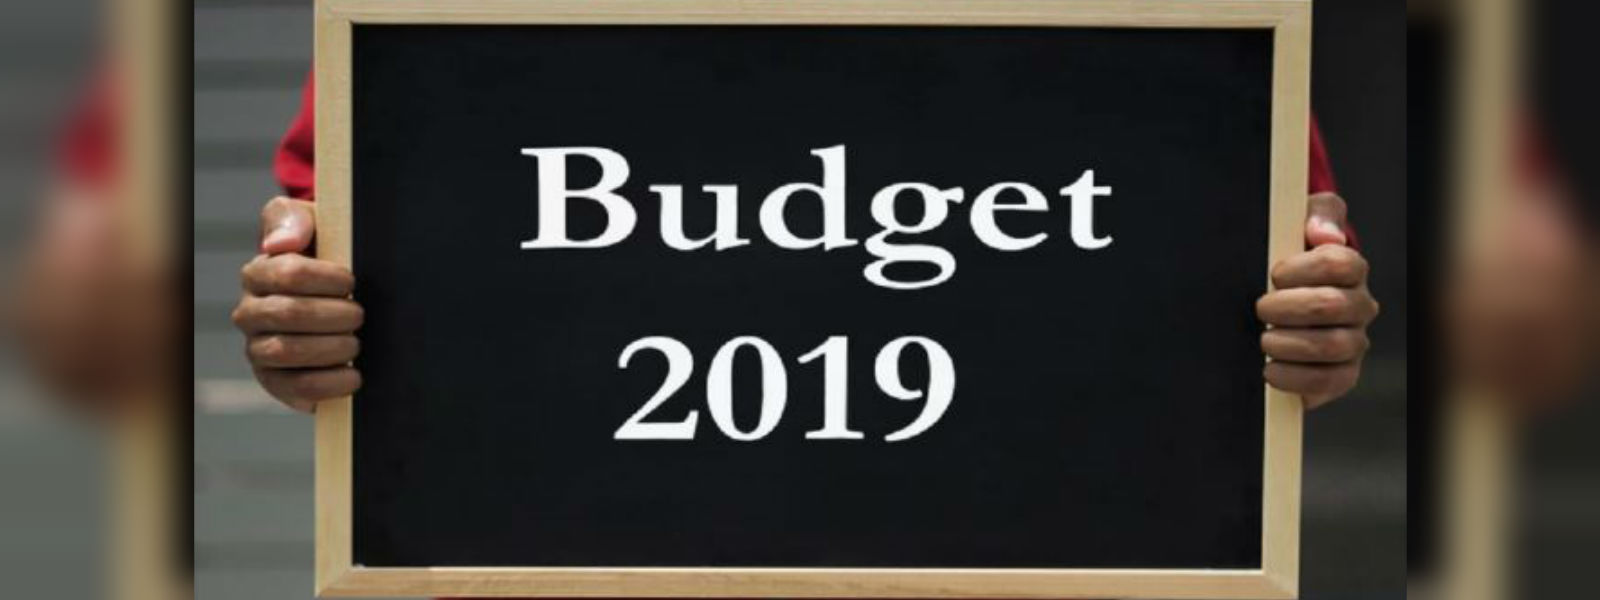 Budget-2019 to be presented today